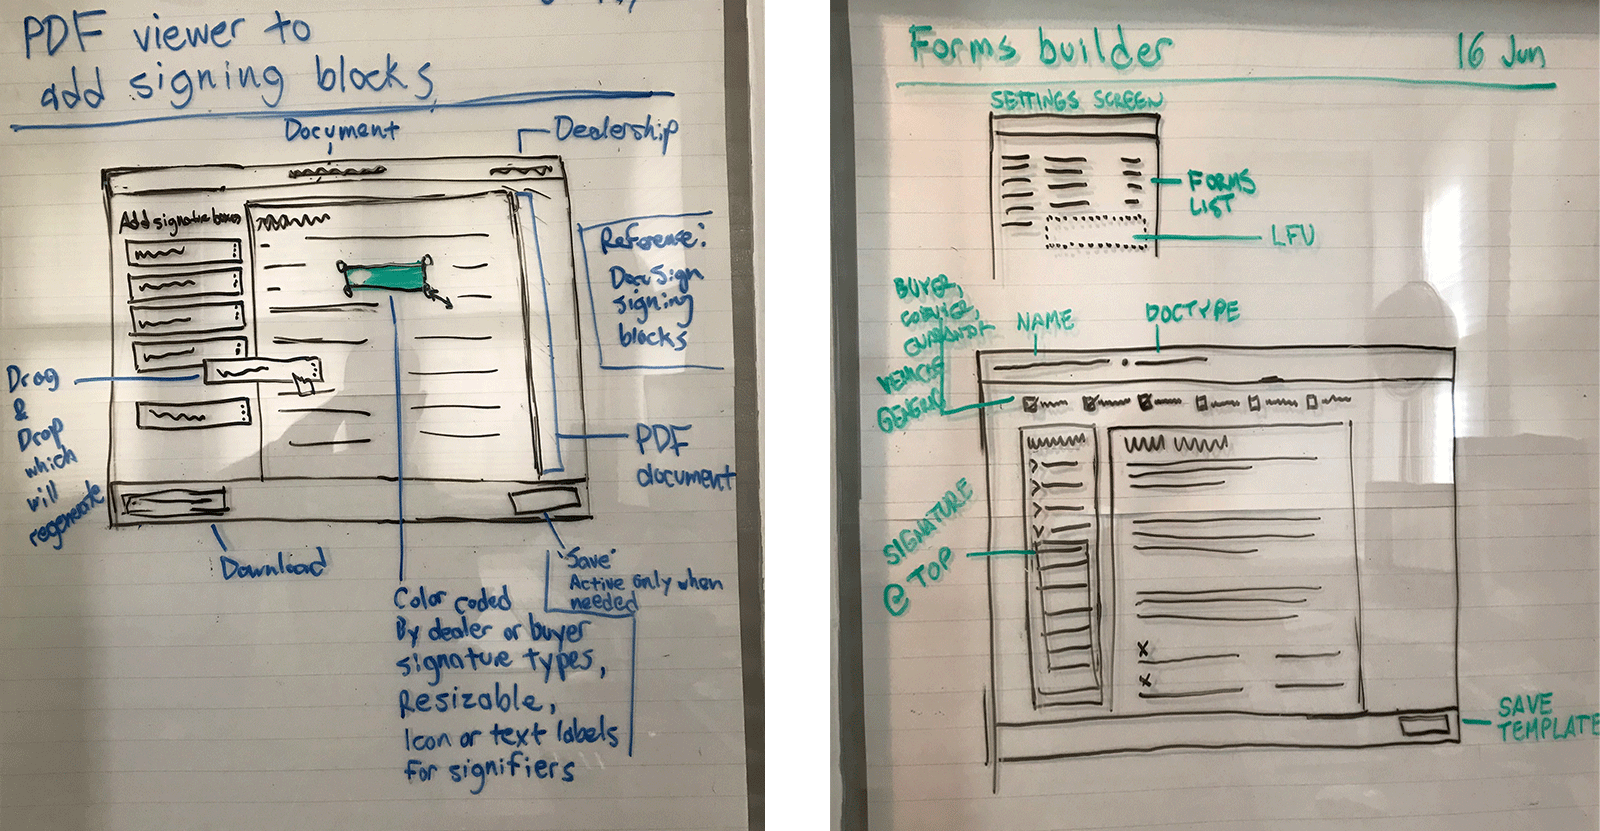 Whiteboard sketches that informed the product